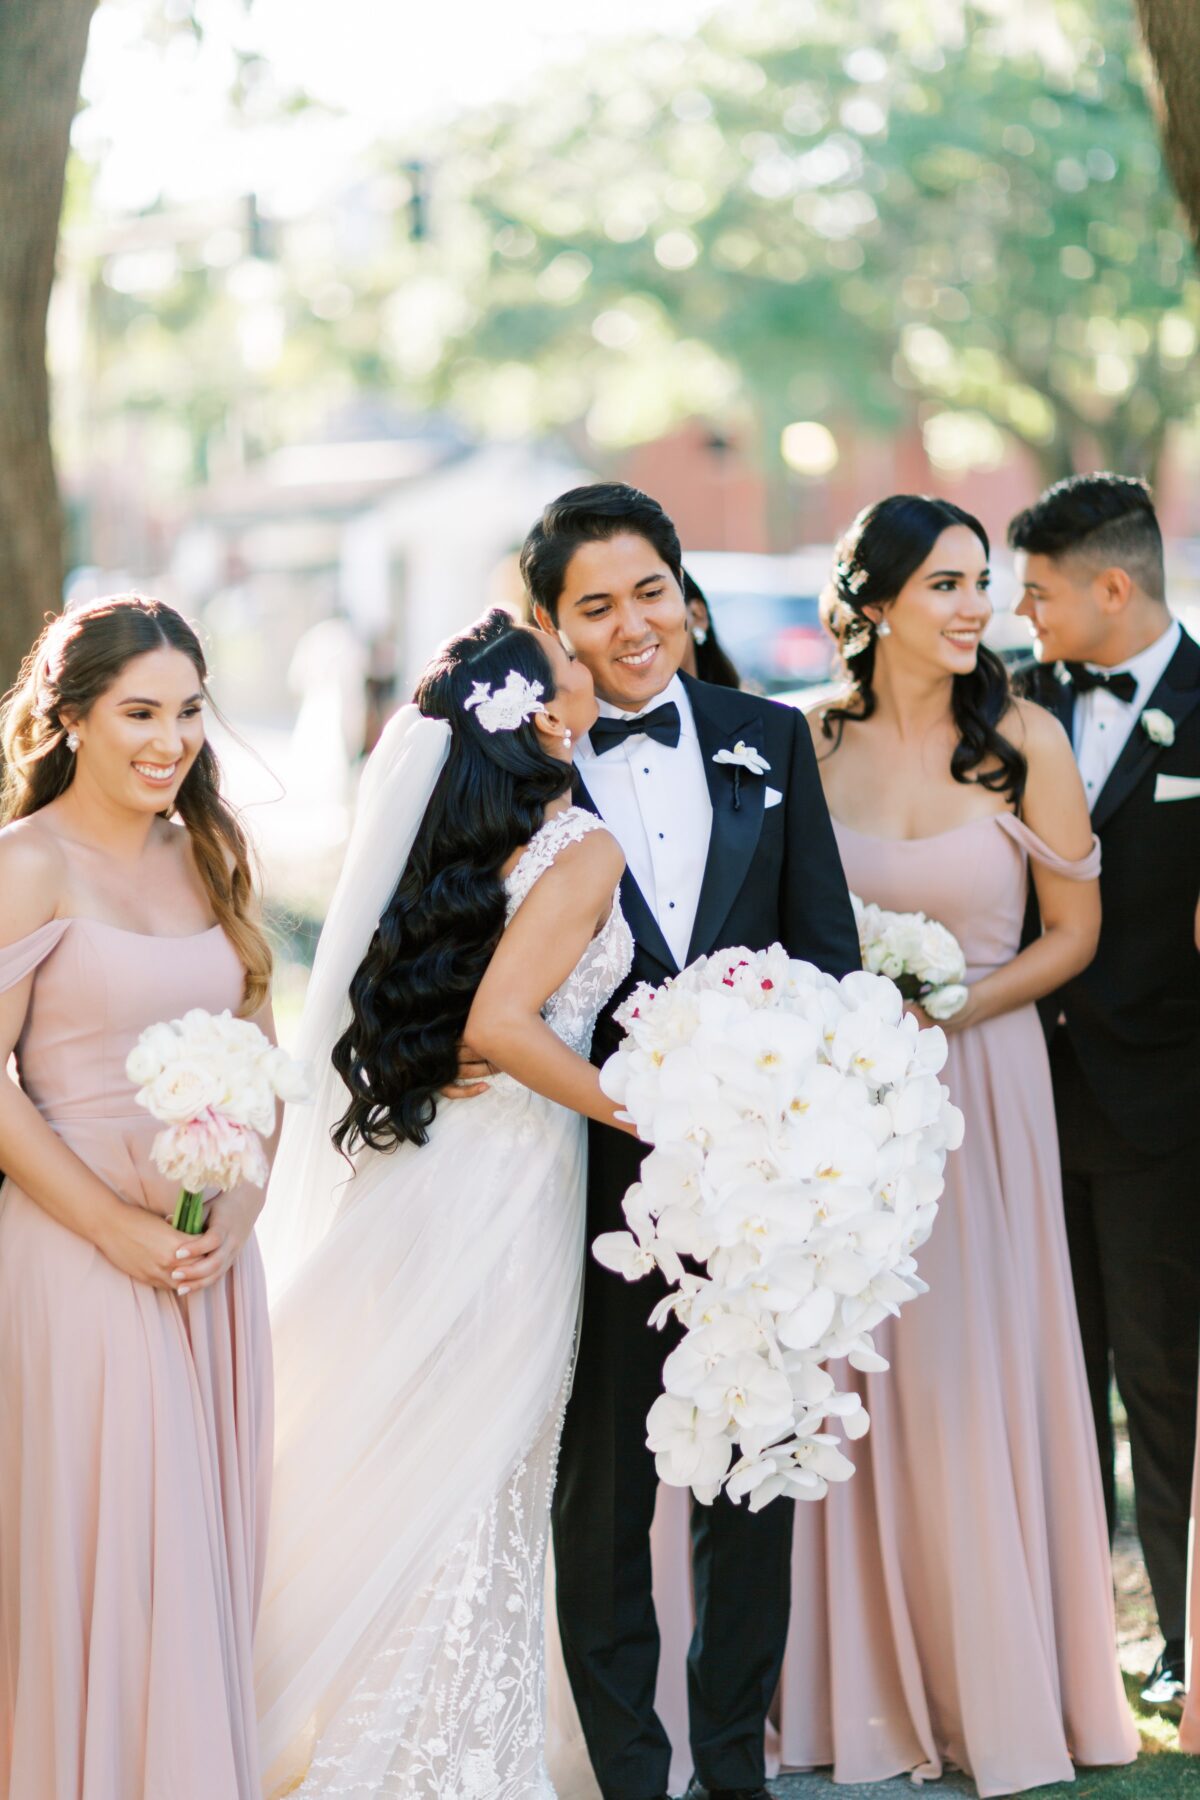 Black tie wedding party photo - Photography: Brooke Images